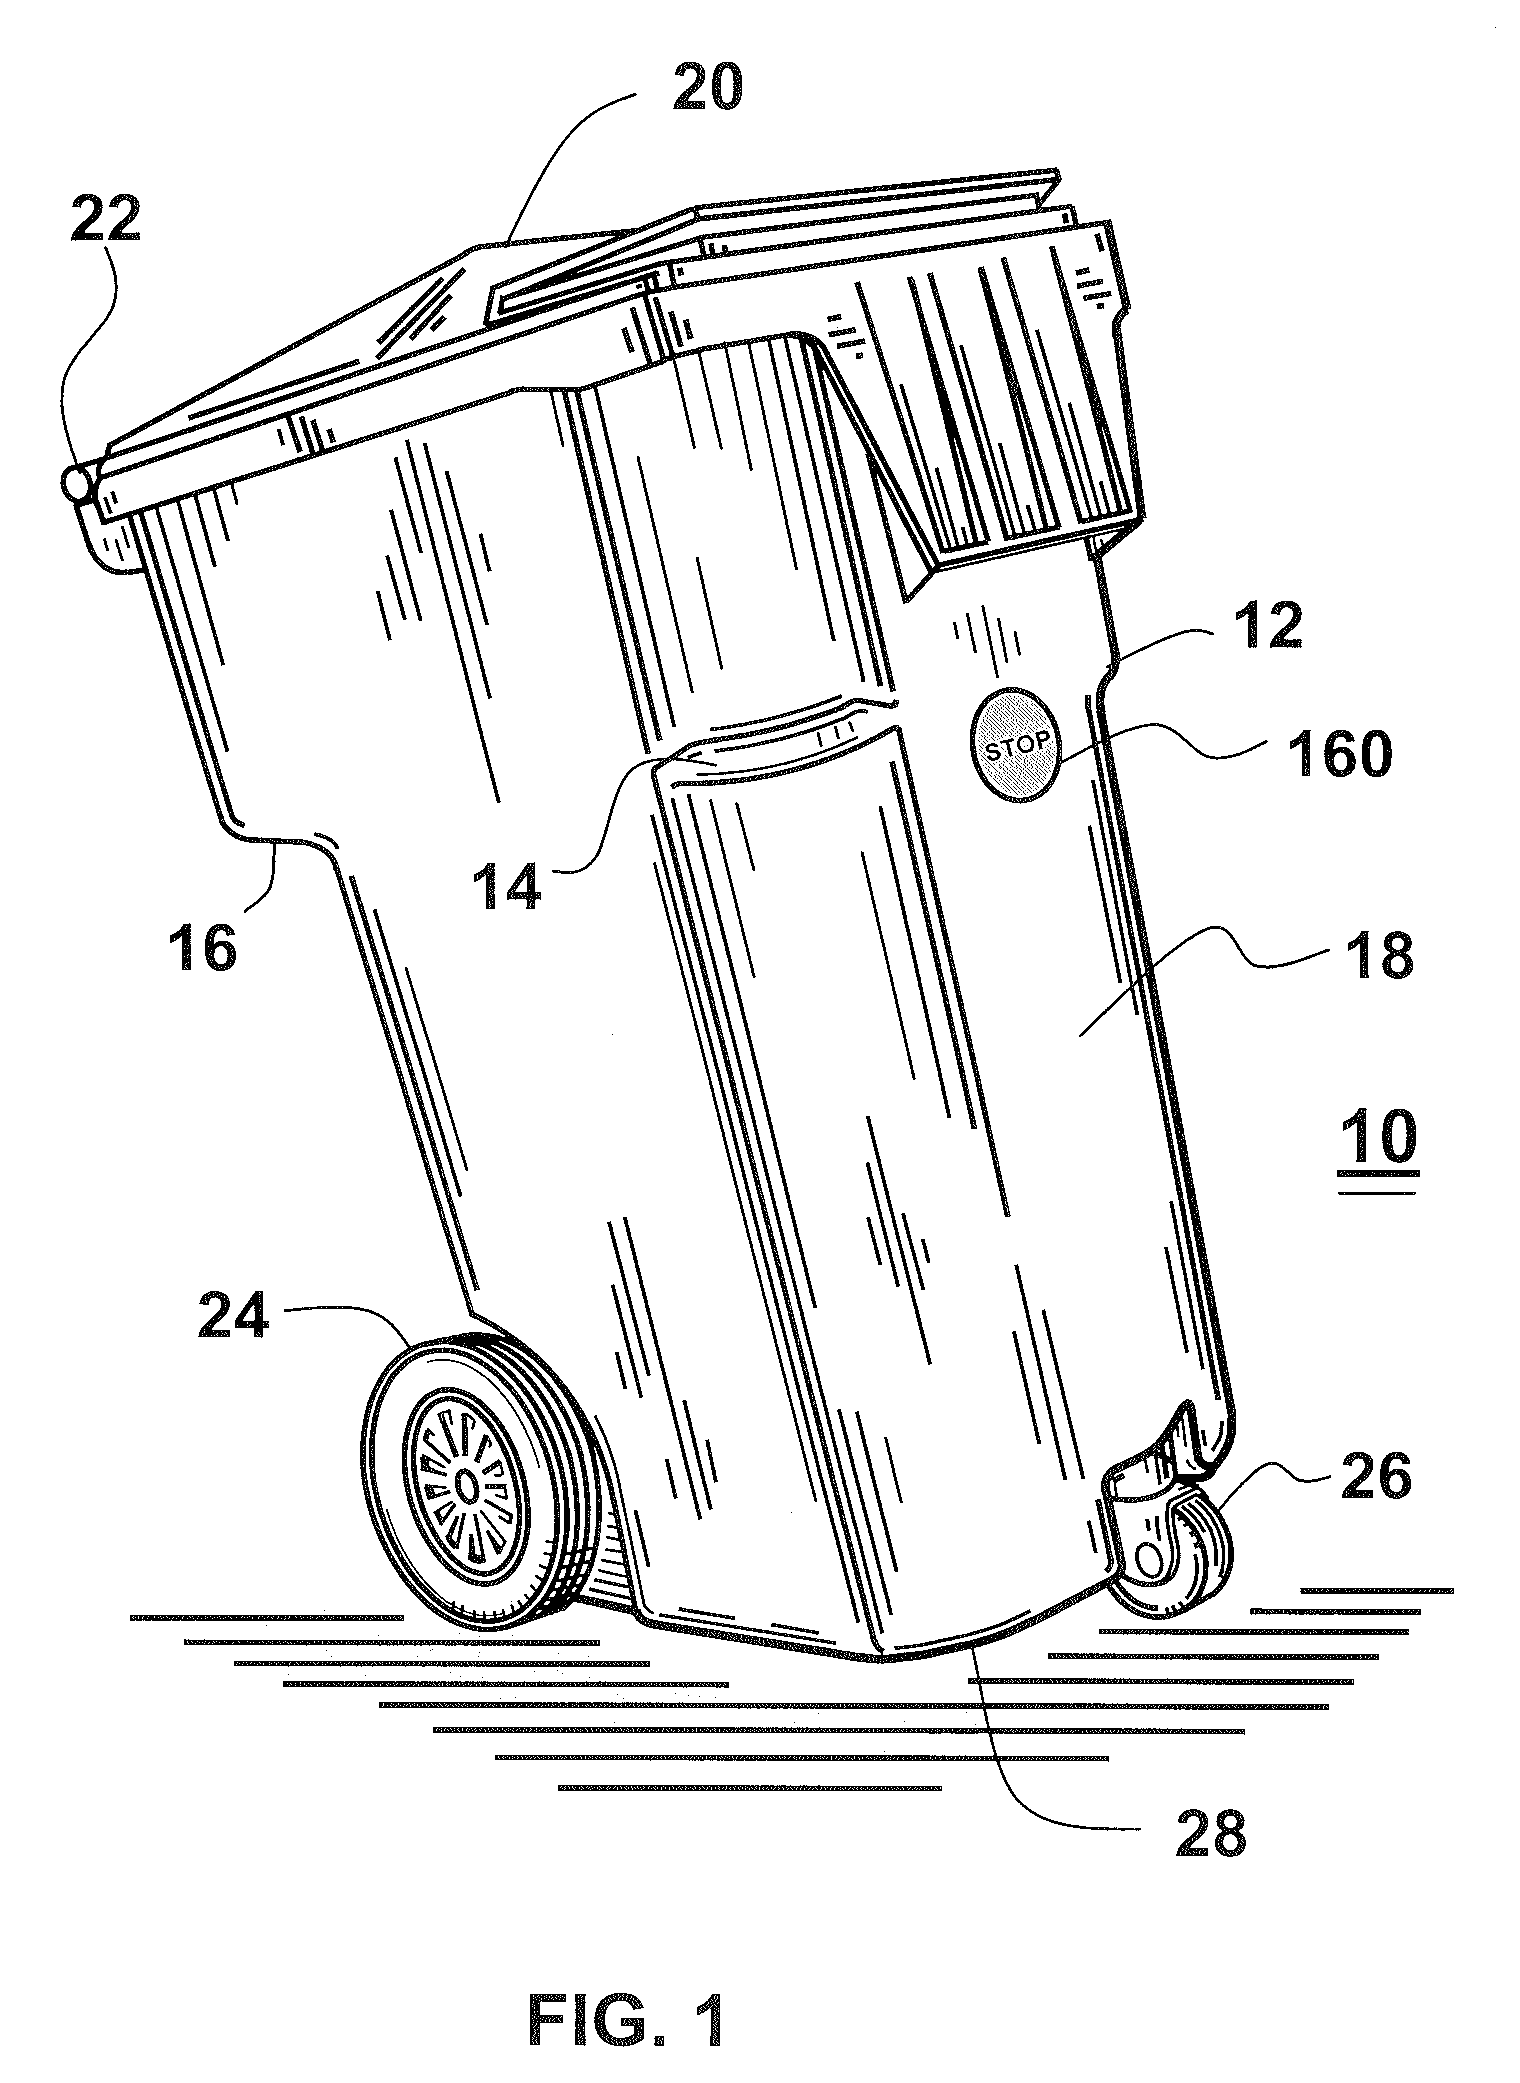 Automated self powered waste container